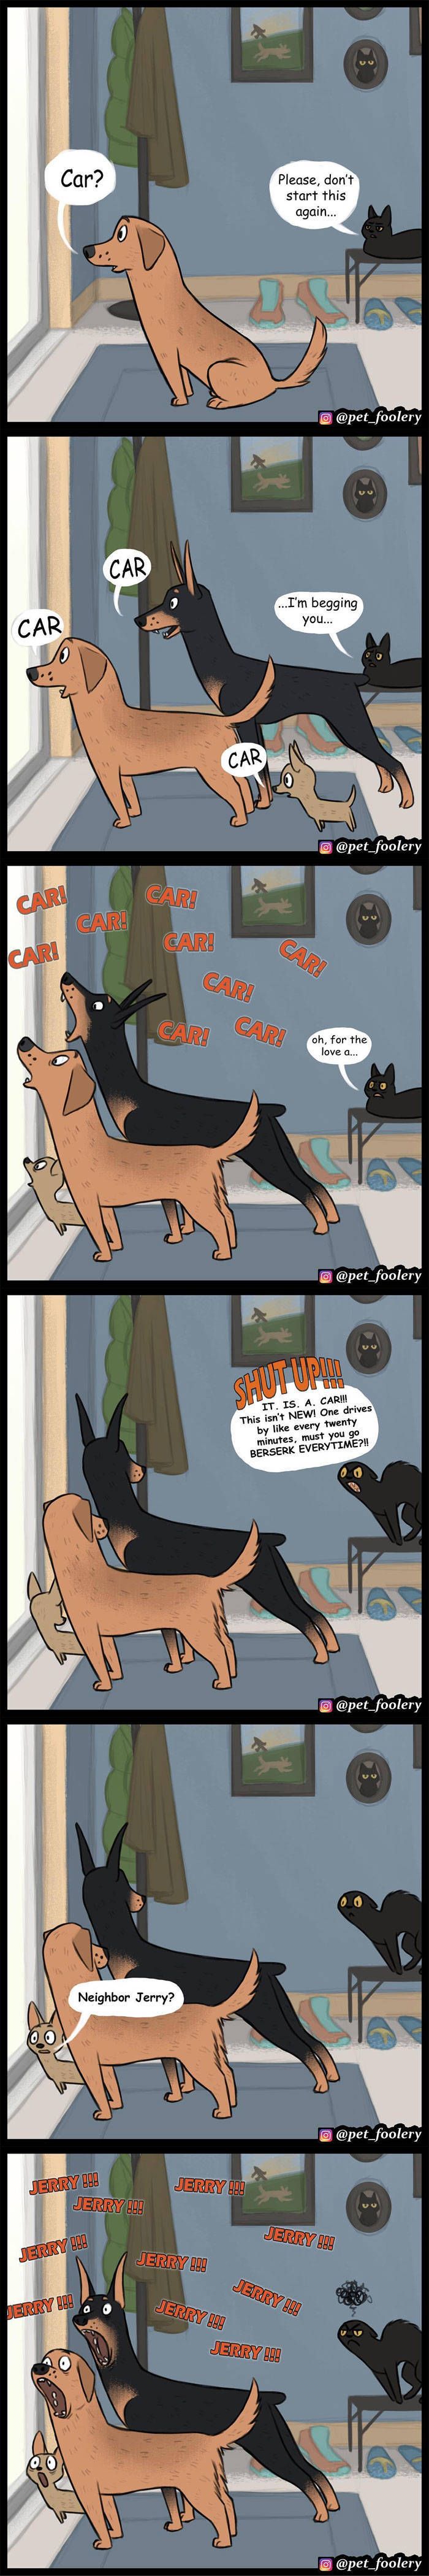 pet_foolery_has_some_of_the_best_animal_comics_for_you_640_high_30.jpg